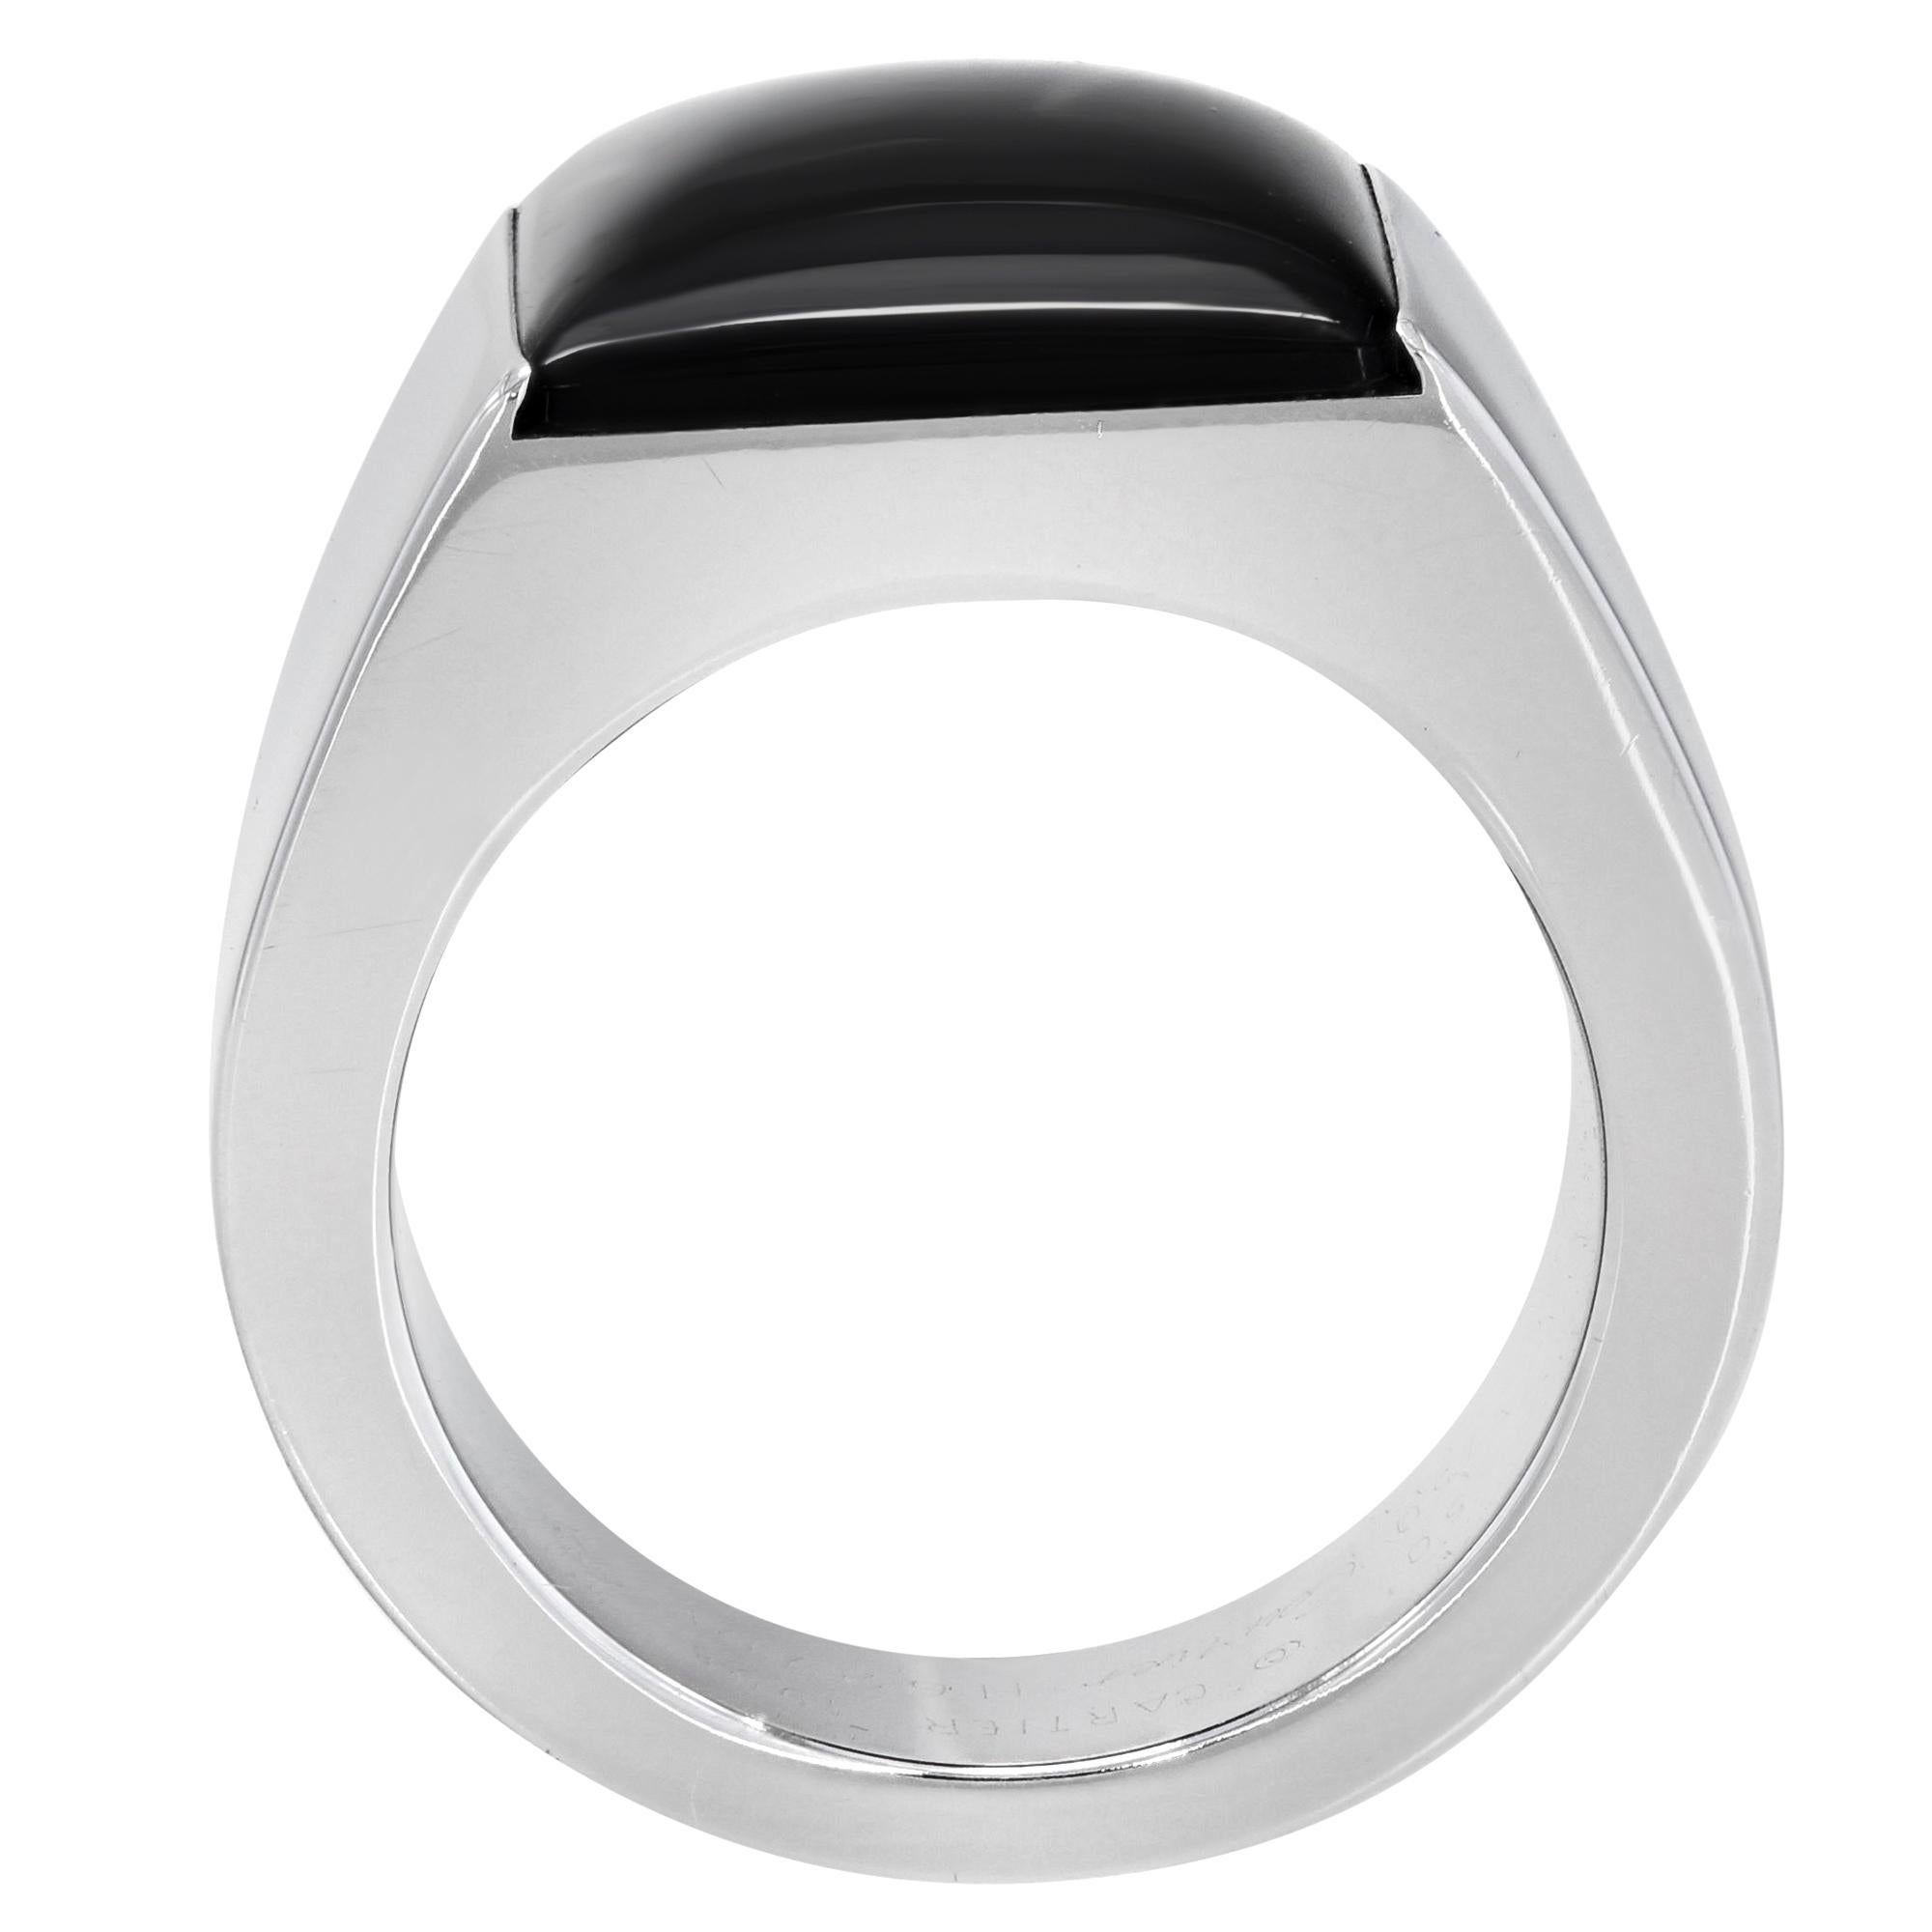 Cartier 18K White Gold Black Onyx tank ring. Ring was created in 1998. Beautiful pre-owned condition, or 100% of your money back.  This lovely ring is made of 18 karat white gold. The simple band has a single black onyx that gives a look of pure